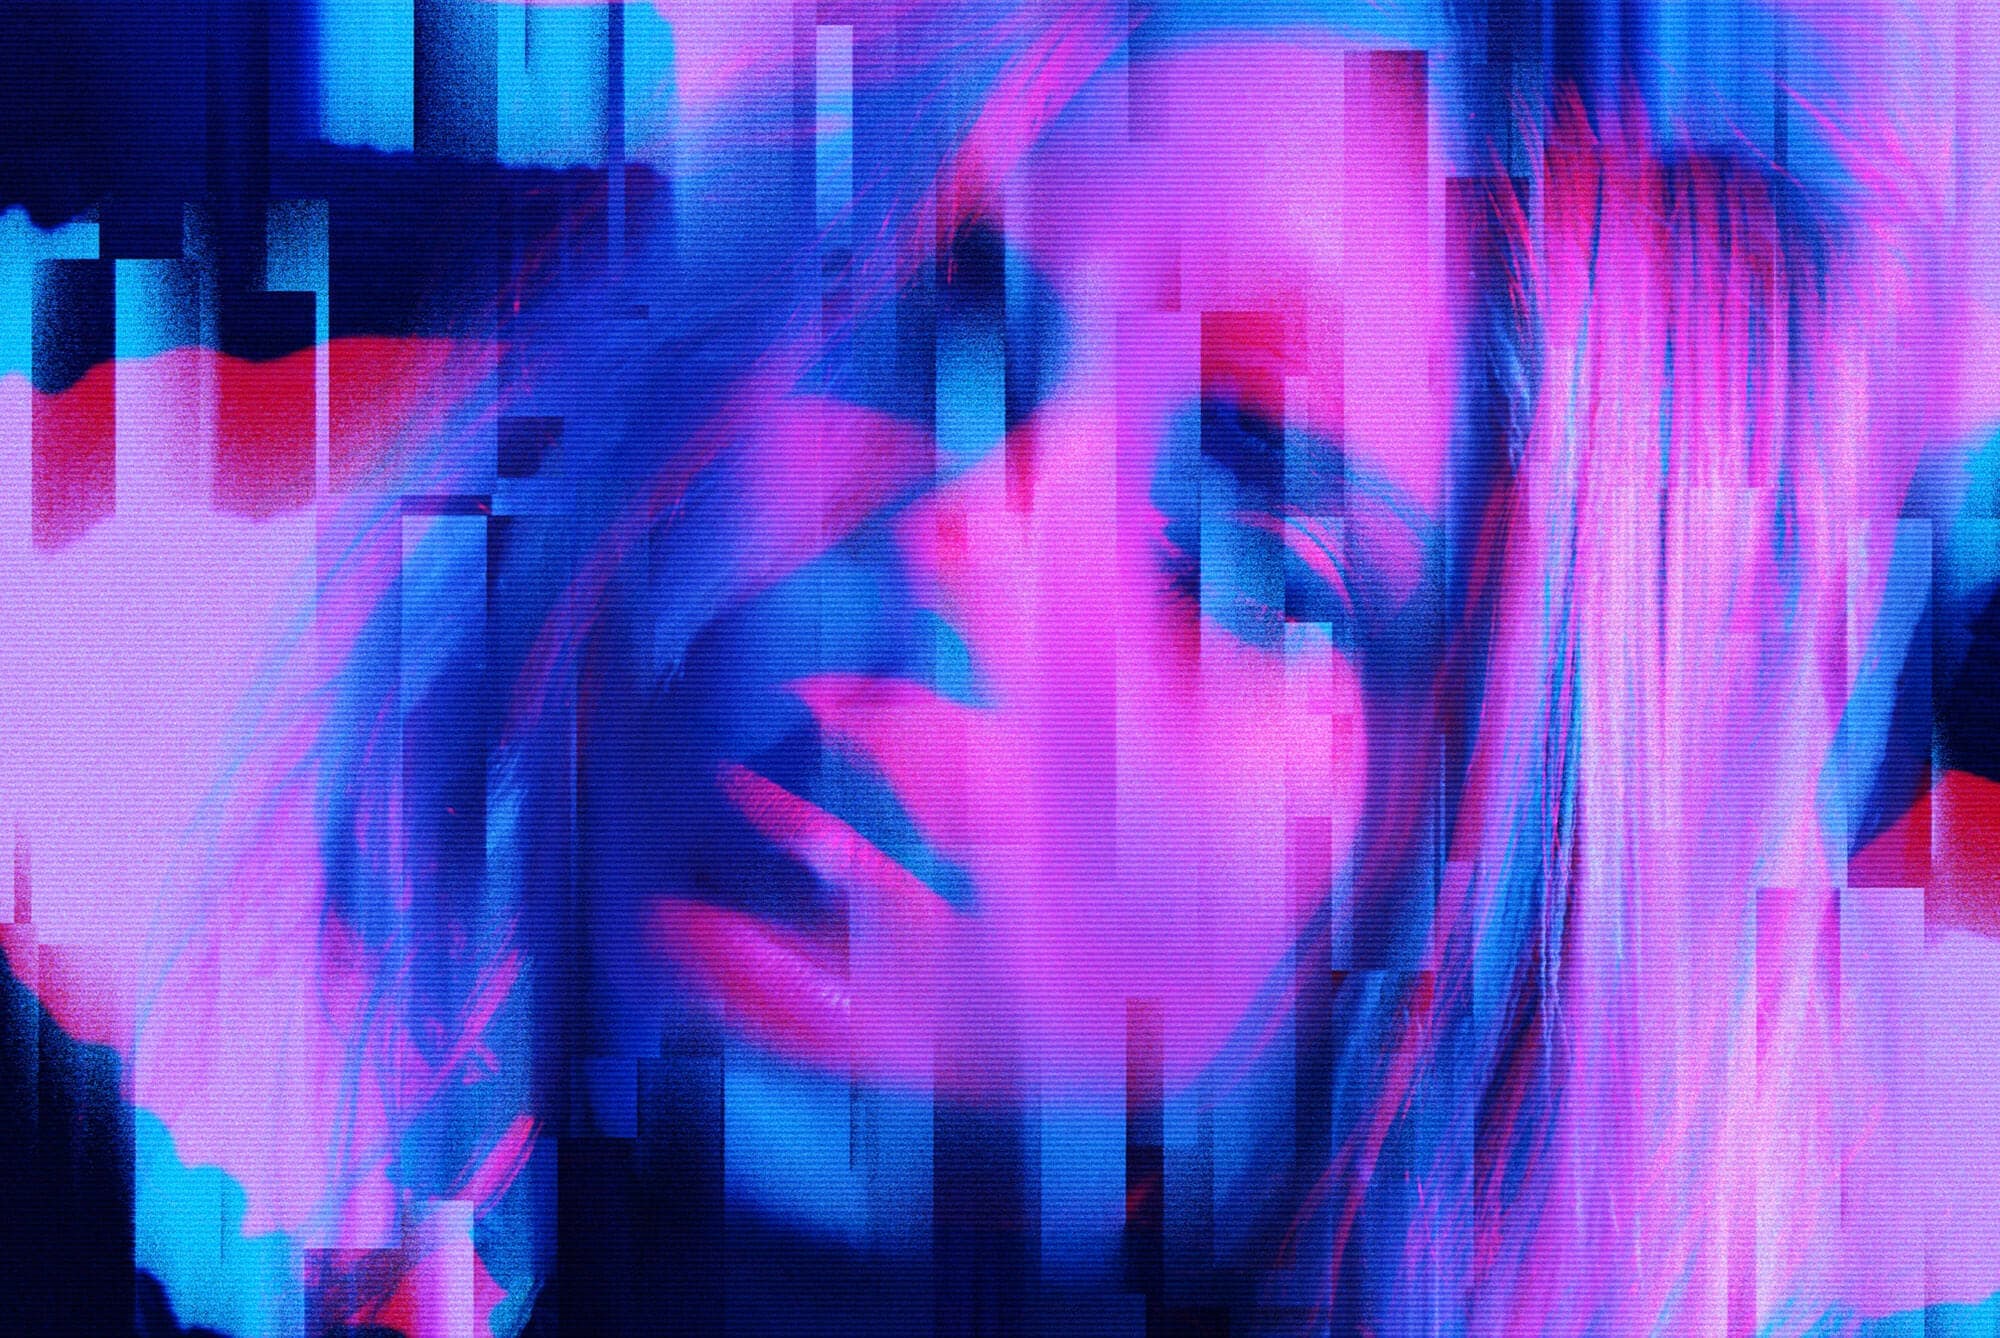 Creative glitch art portrait with abstract digital distortion effect, vibrant colors, suitable for modern graphics or templates.